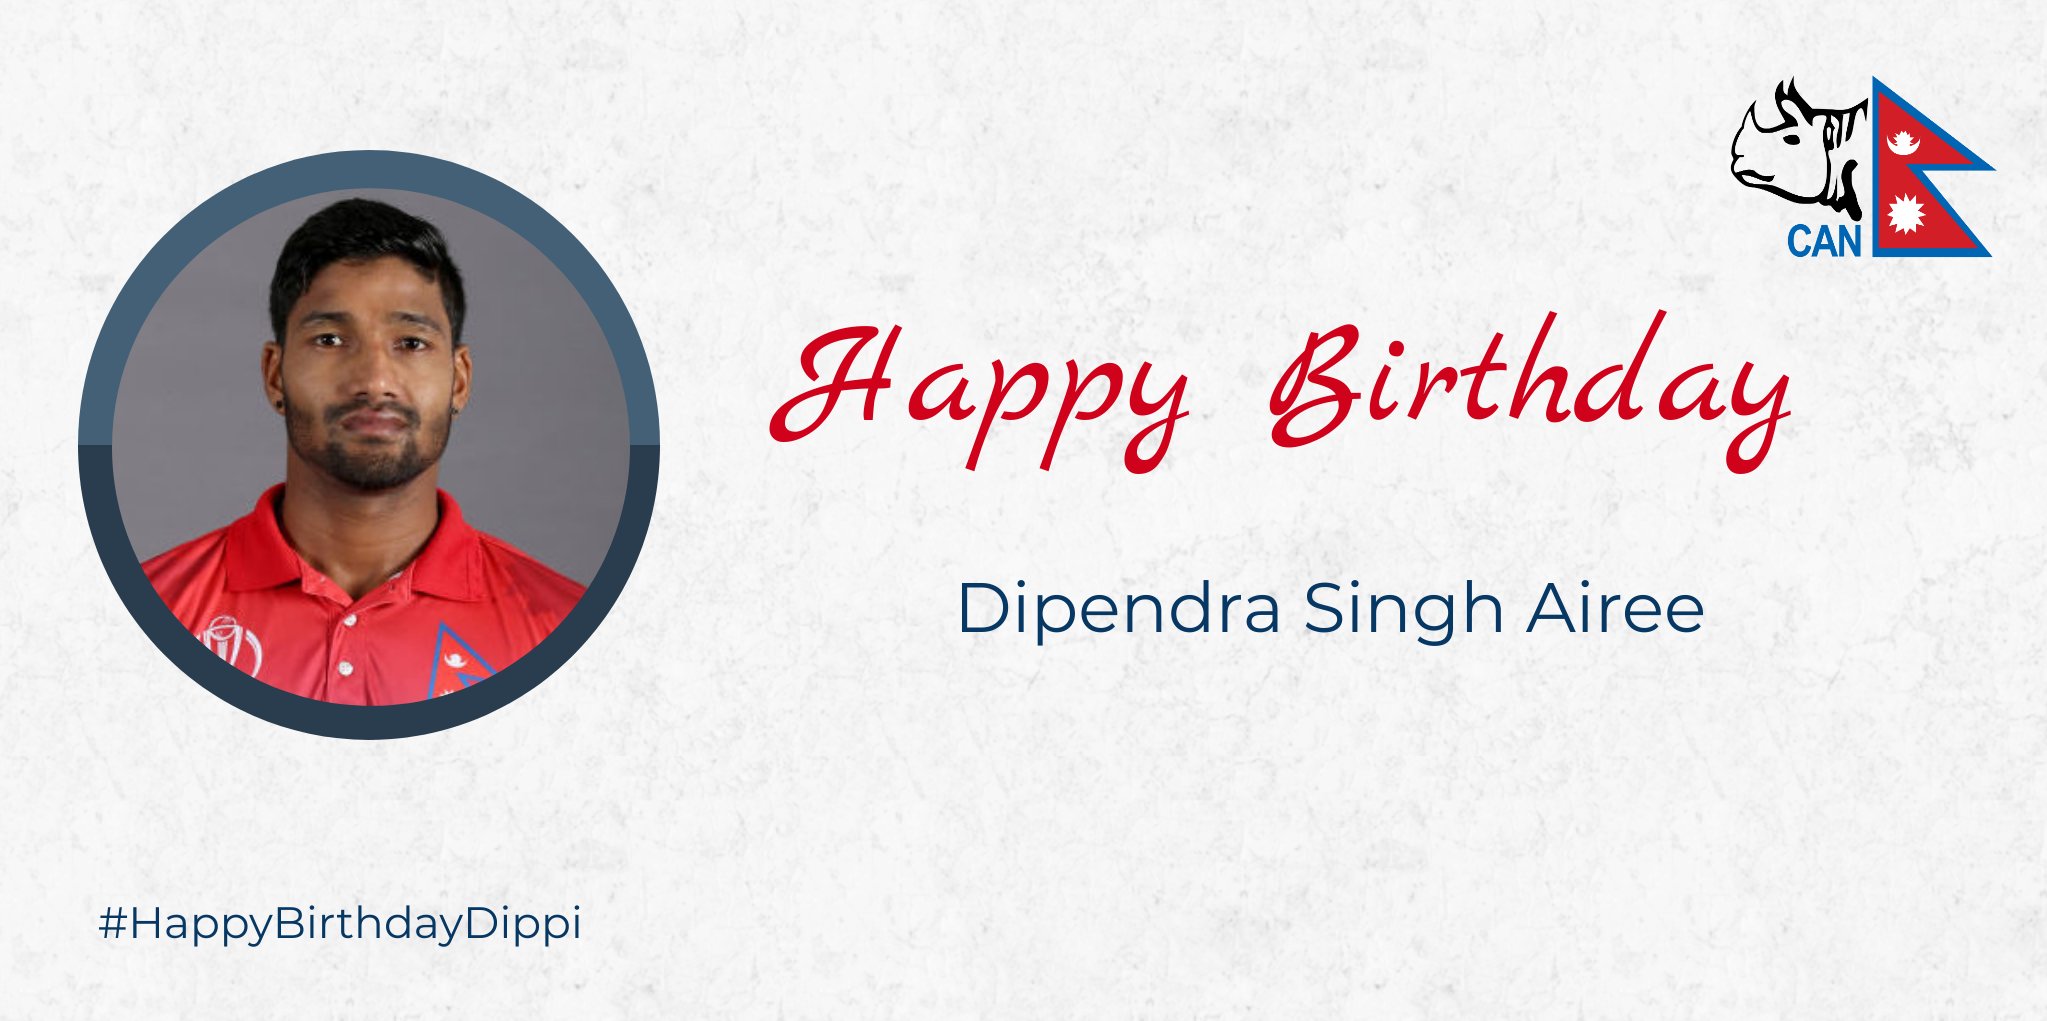 CAN on Twitter: "Happy Birthday to the Vice-Captain of Nepali Cricket Team Dipendra  Singh Airee, Keep Shining. #HappyBirthdayDippi https://t.co/XKA9OxVREE" /  Twitter